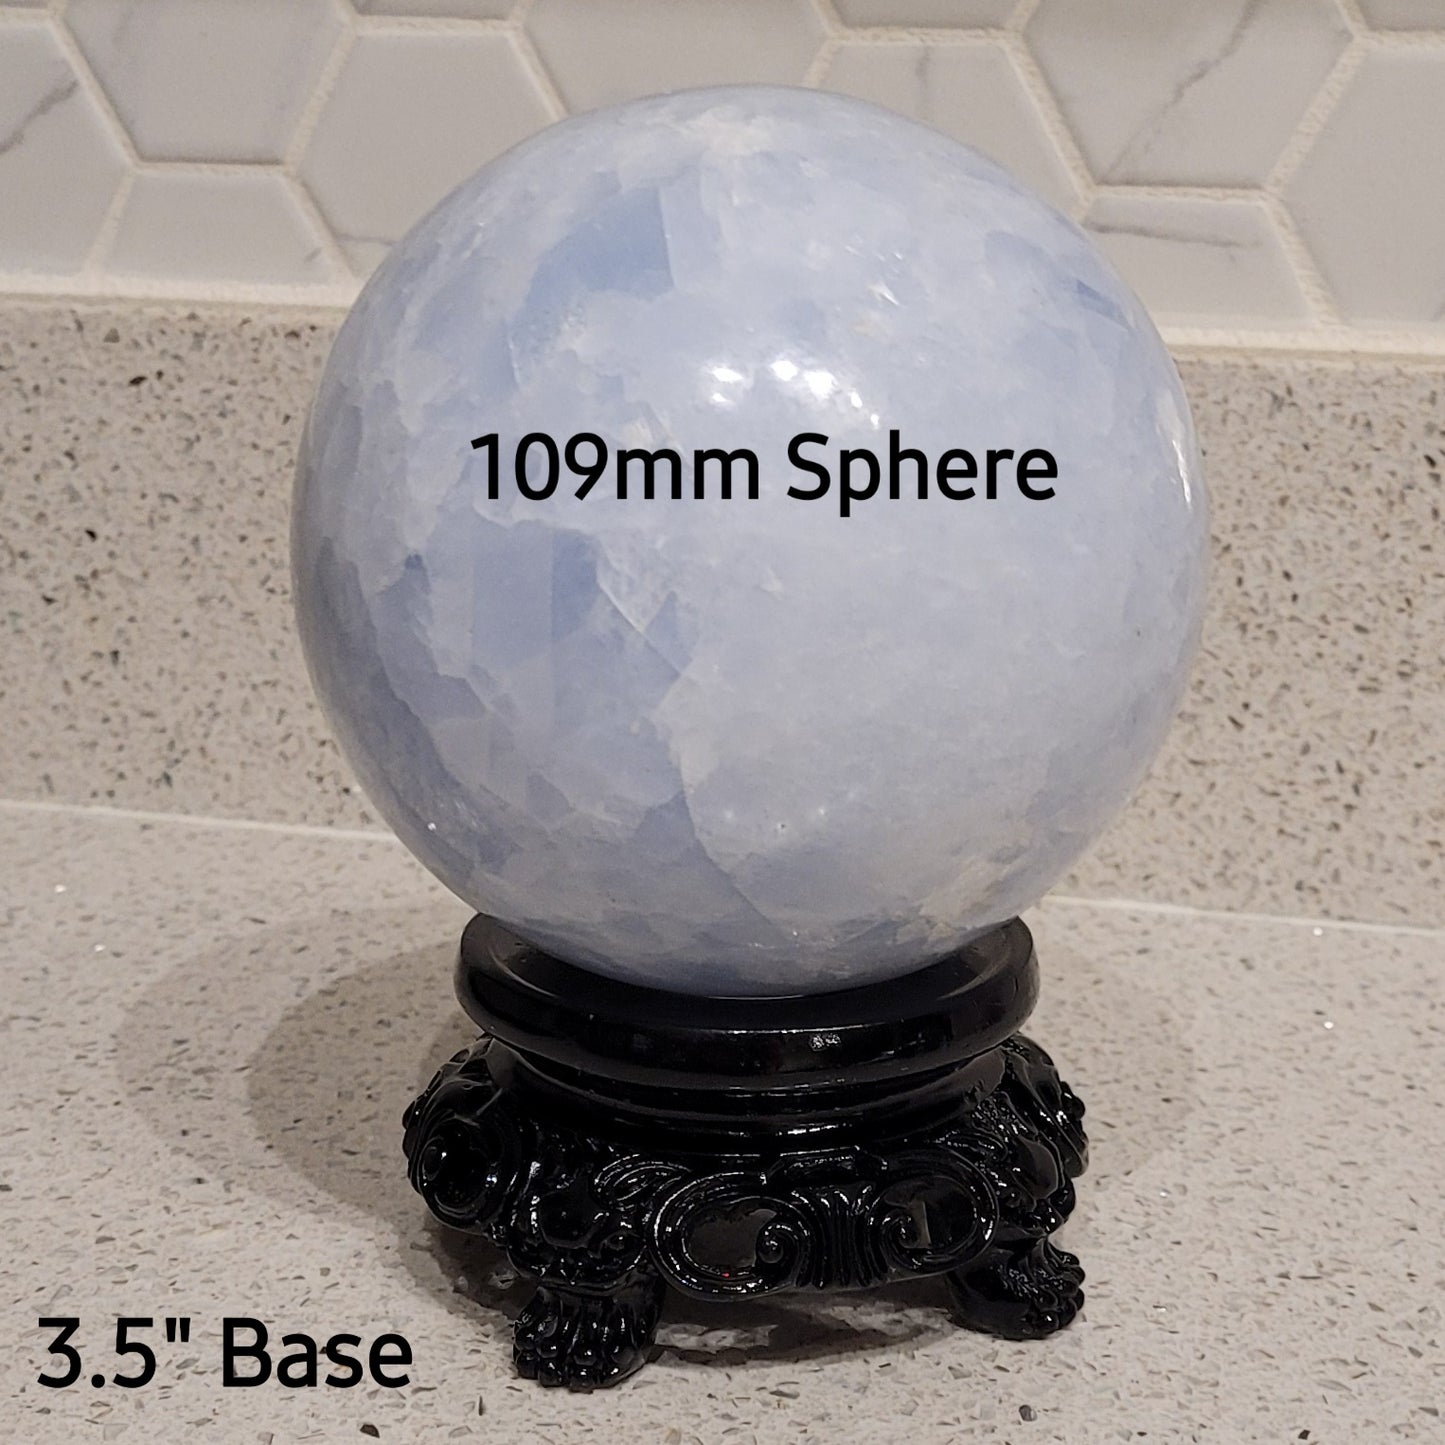 Fancy Black Sphere Display Stands in 6 Sizes, for Crystal Balls 1.1" to 9" (28mm to 230mm+)